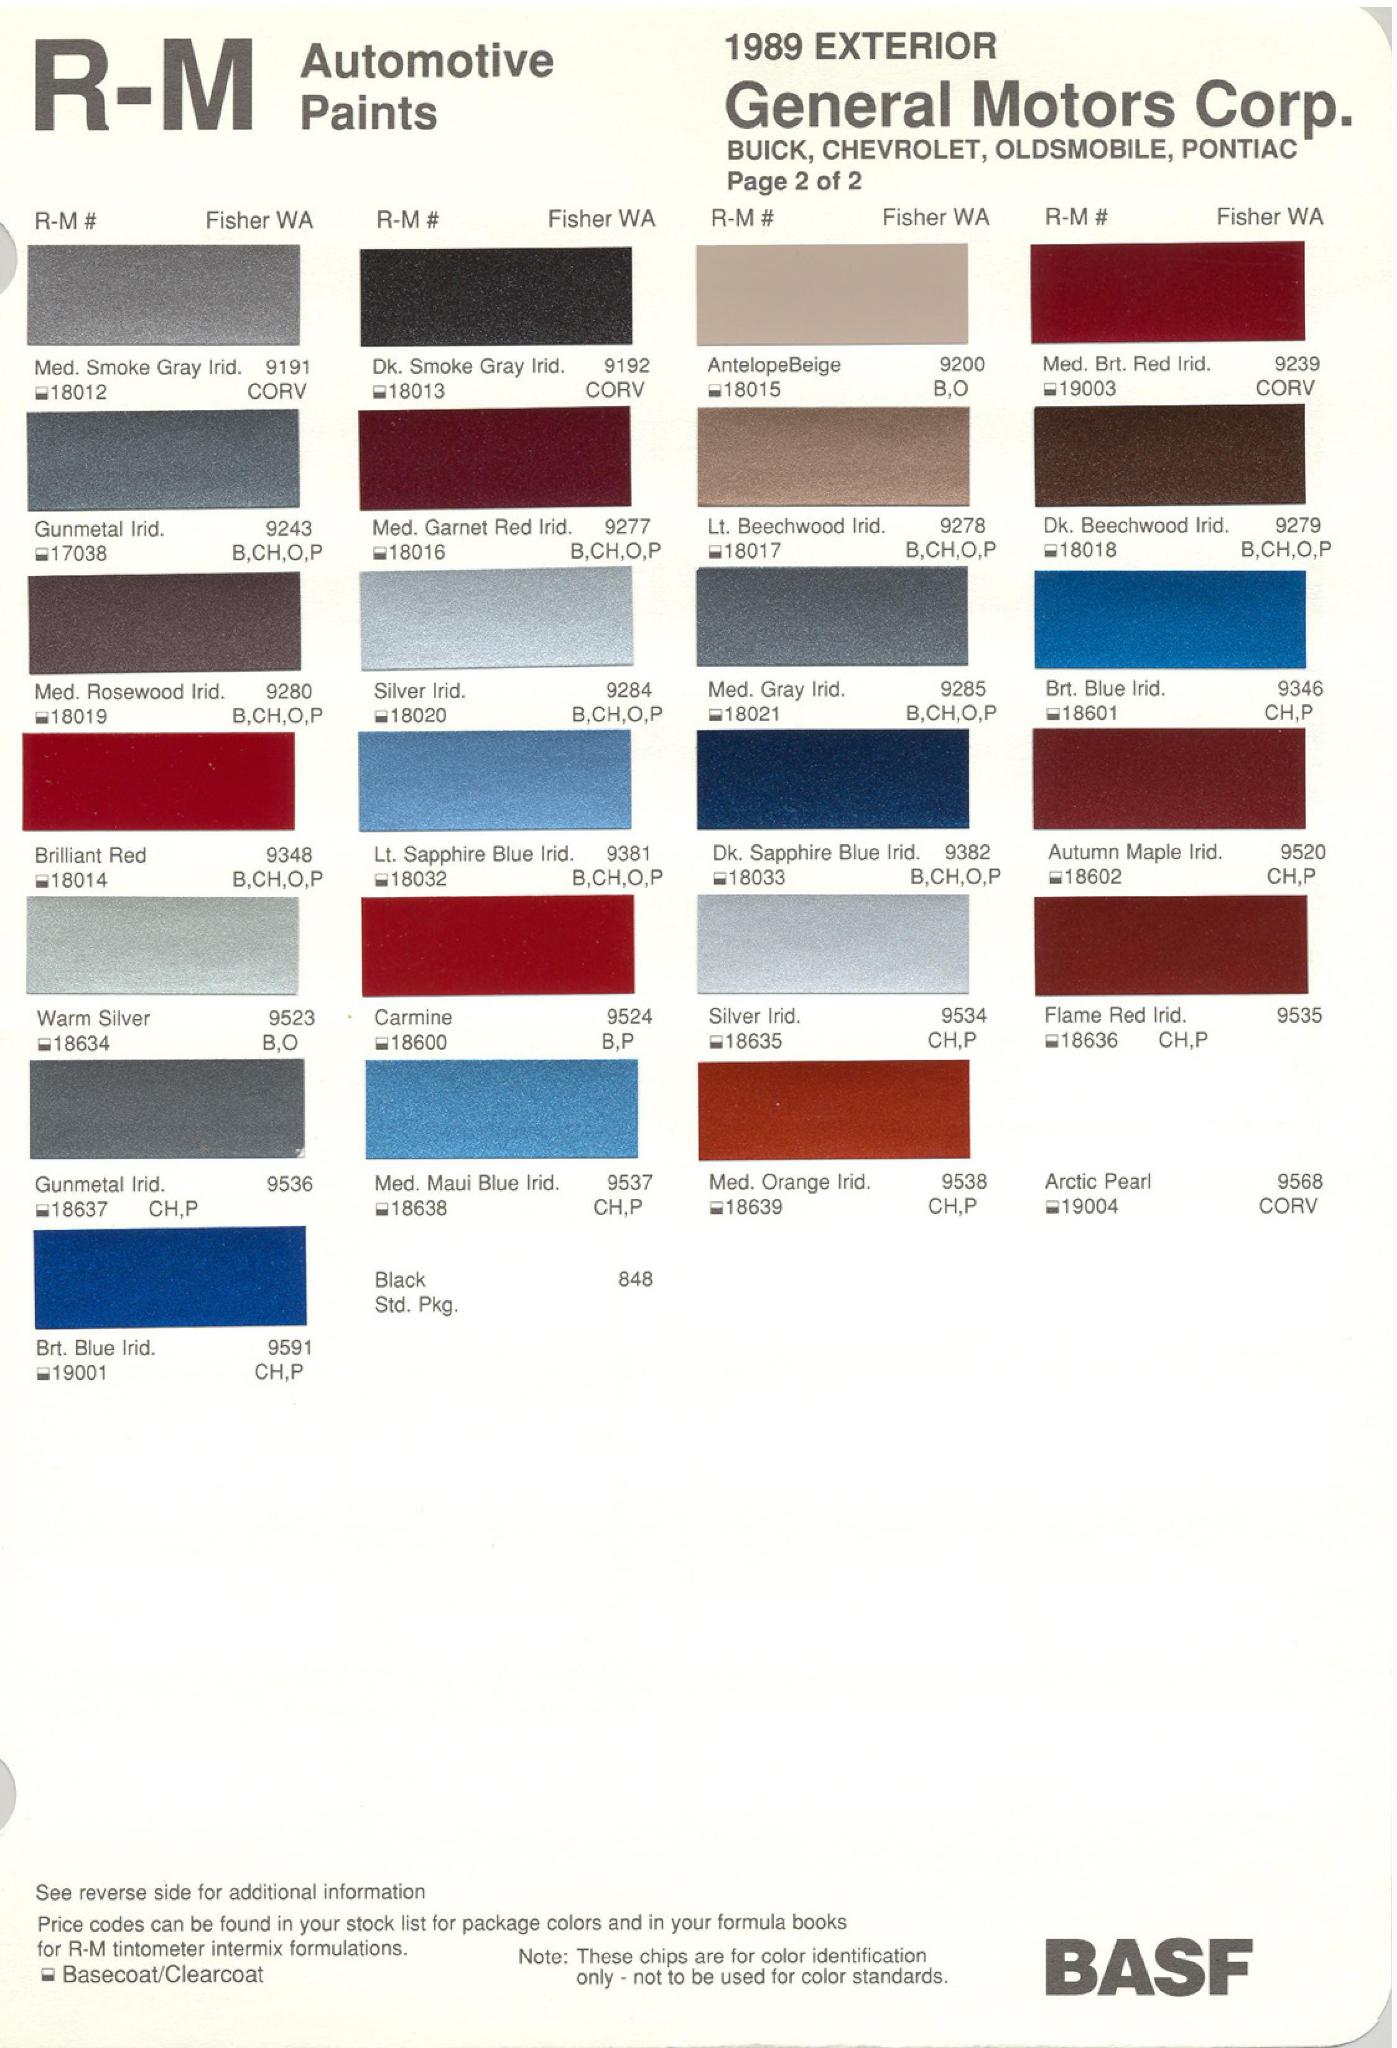 General Motors oem paint swatches, color codes and color names for 1989 vehicles.